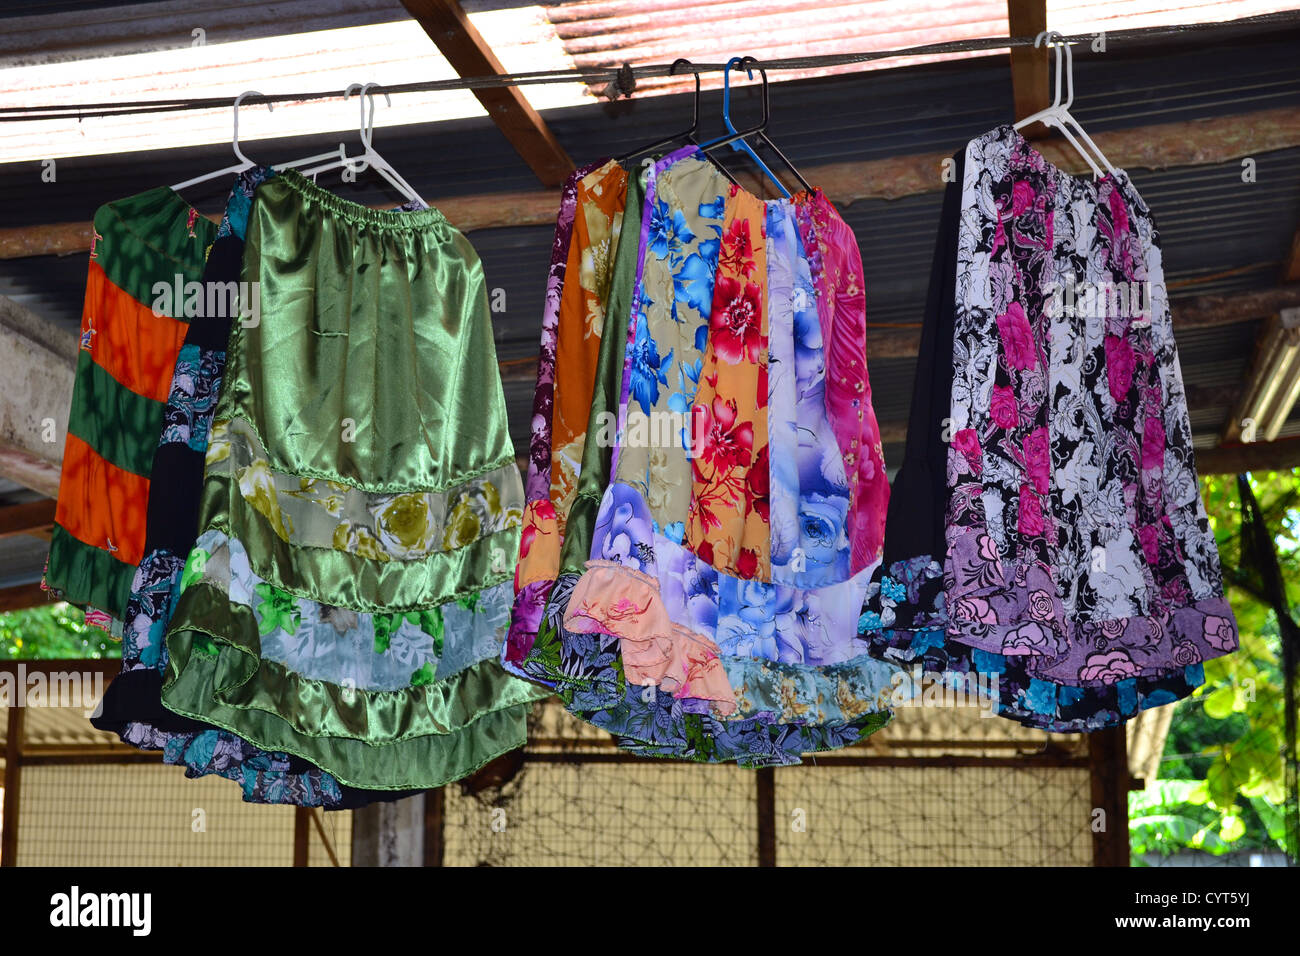 Dresses for sale at local market, Pohnpei, Federated States of Micronesia  Stock Photo - Alamy